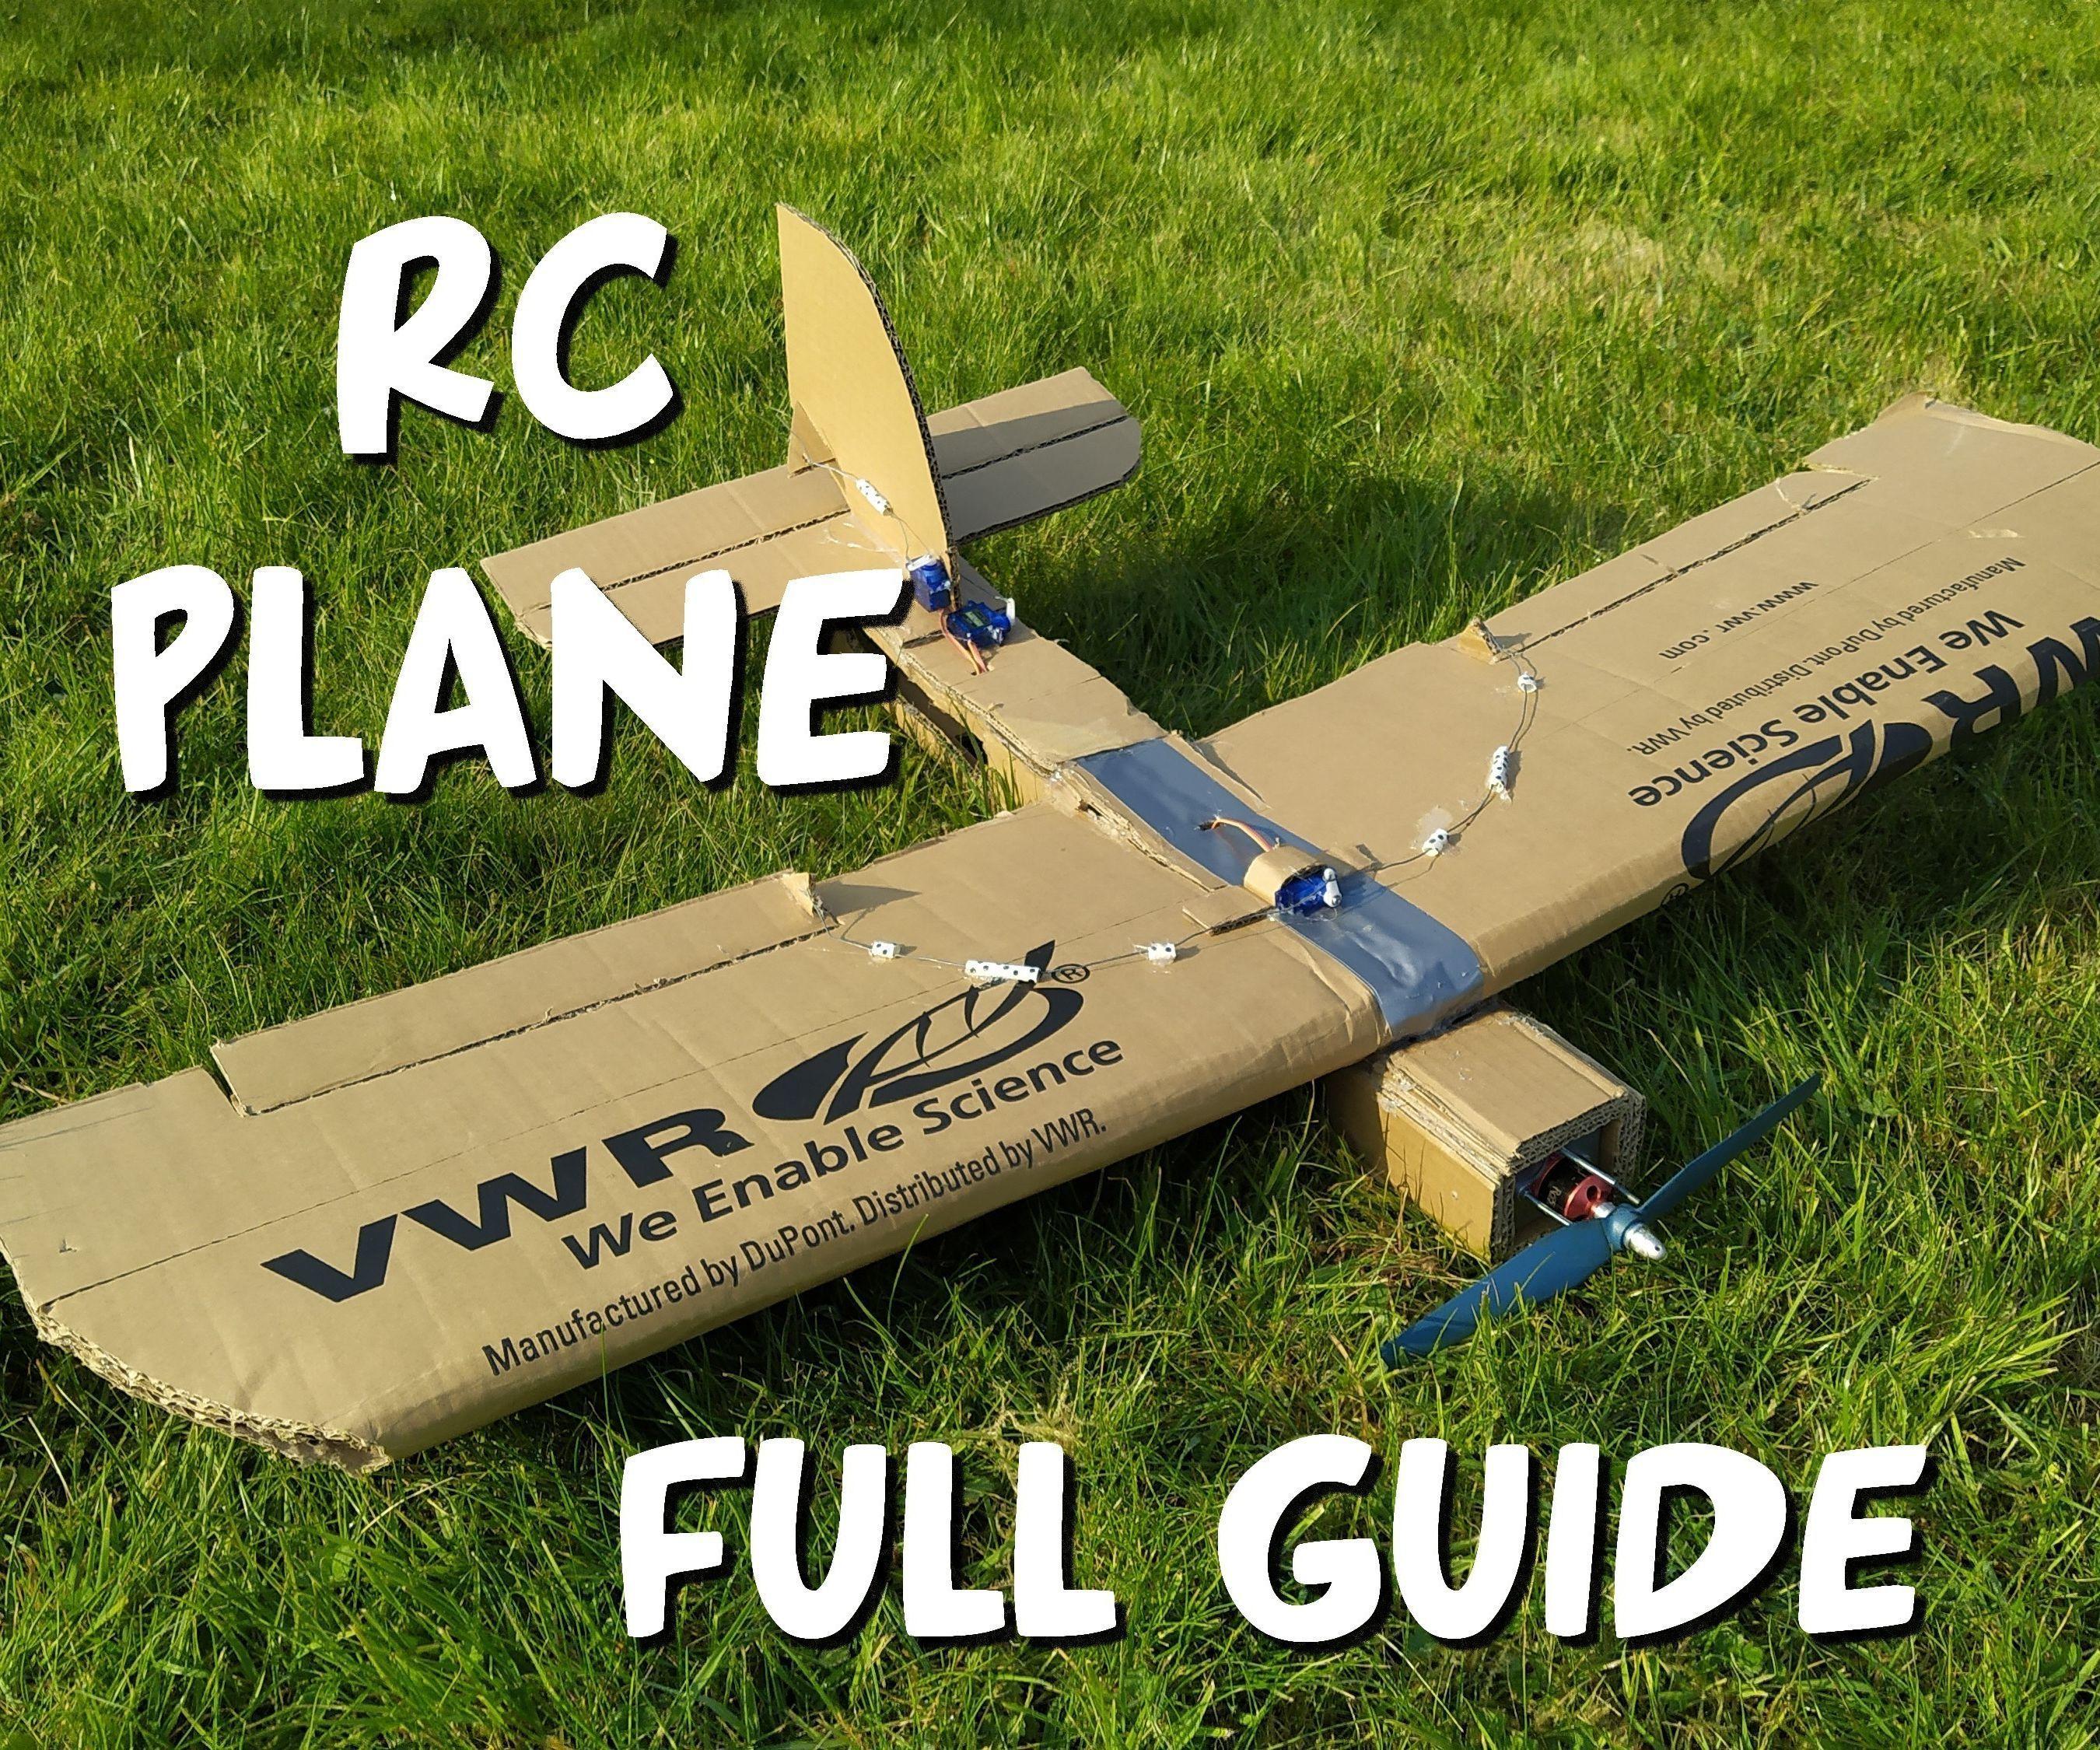 Rc Model Airplanes: Materials and Tools for Building RC Model Airplanes